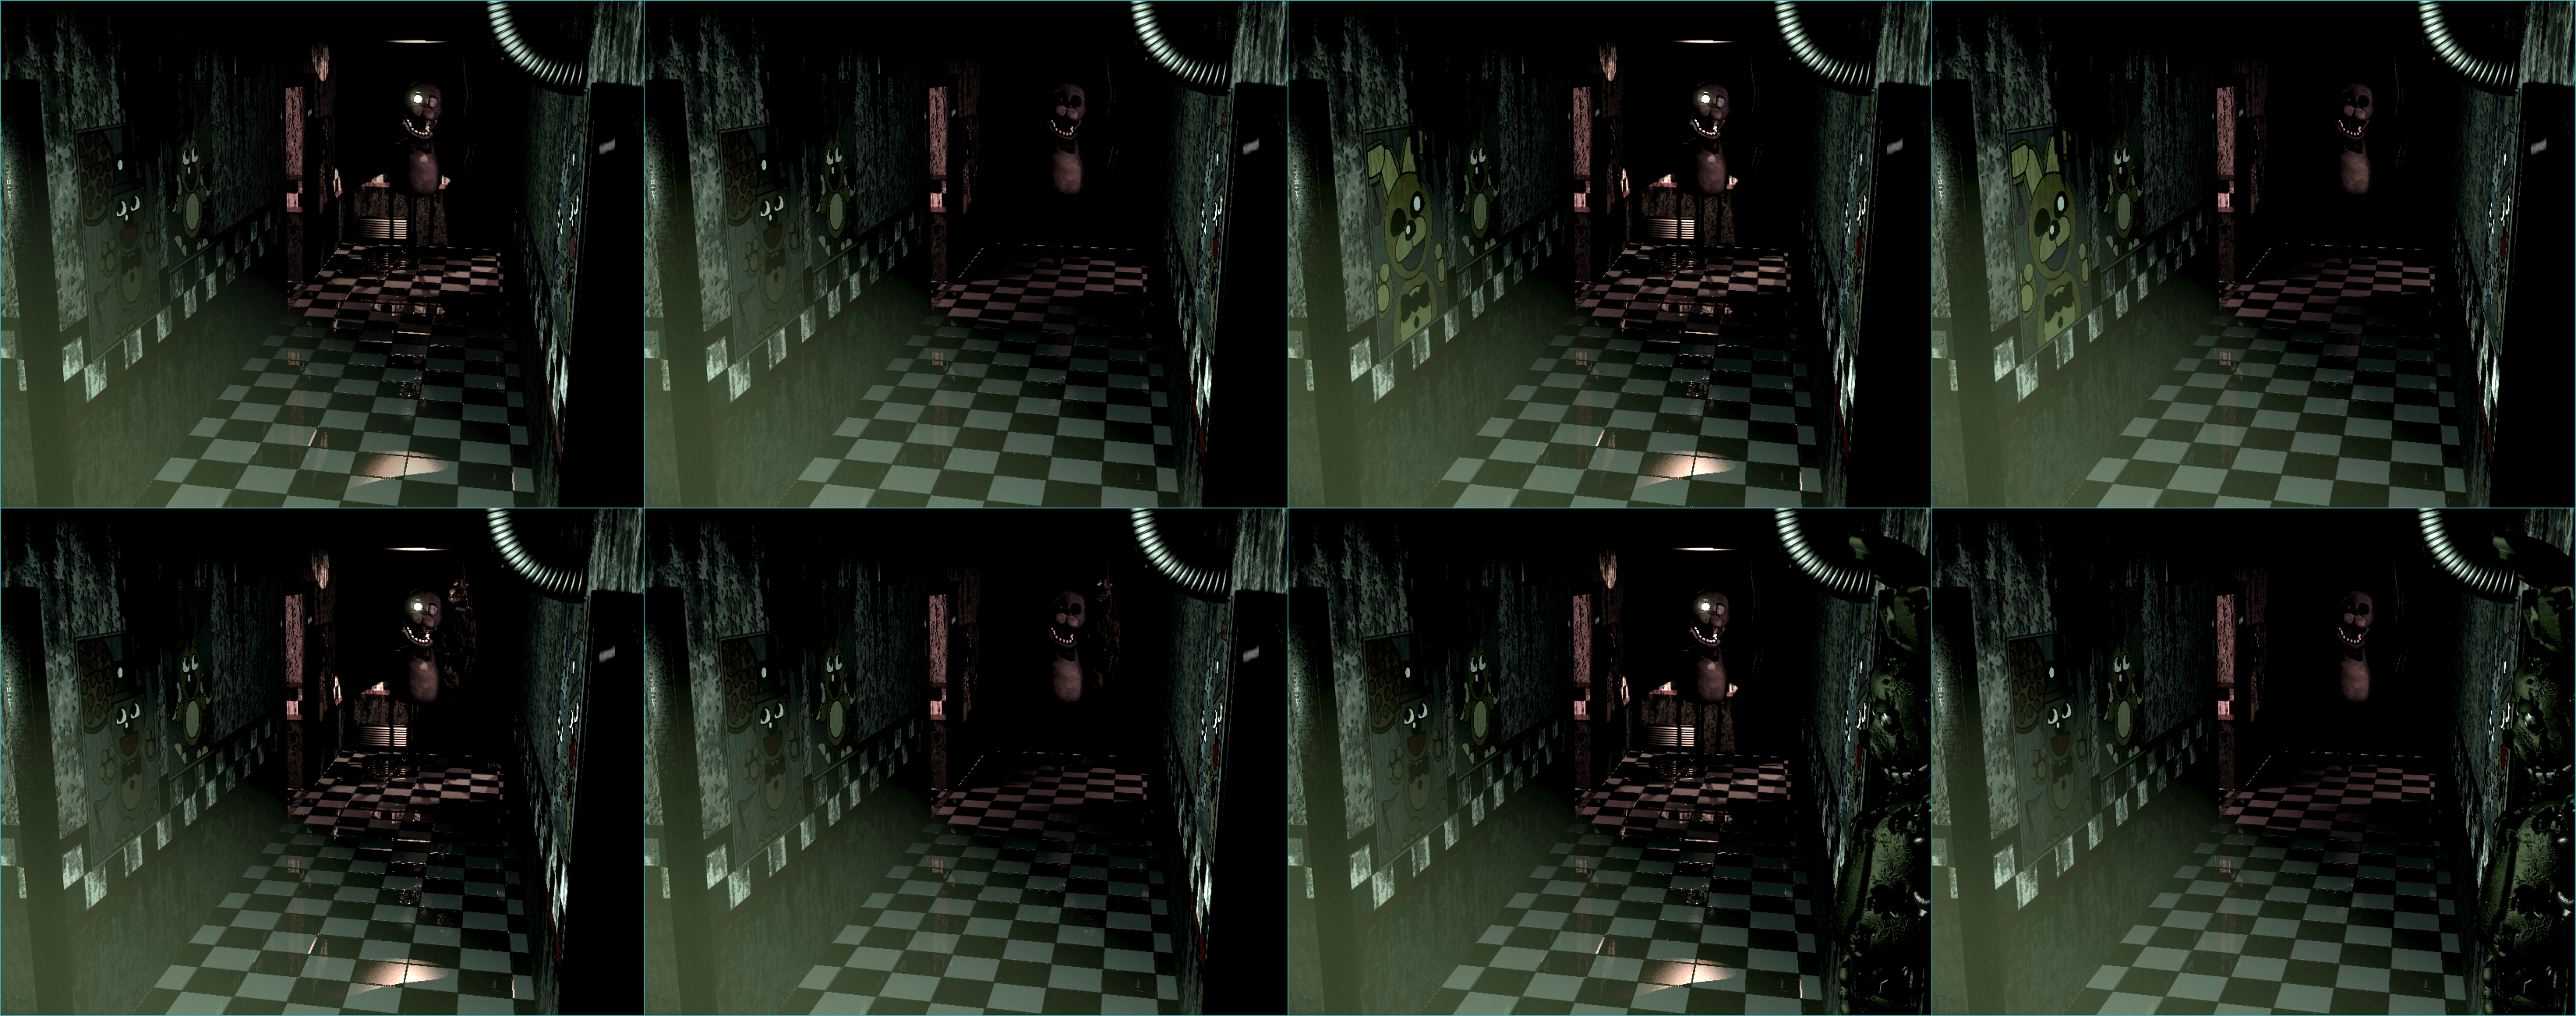 Five Nights at Freddy's 3 - Room 02